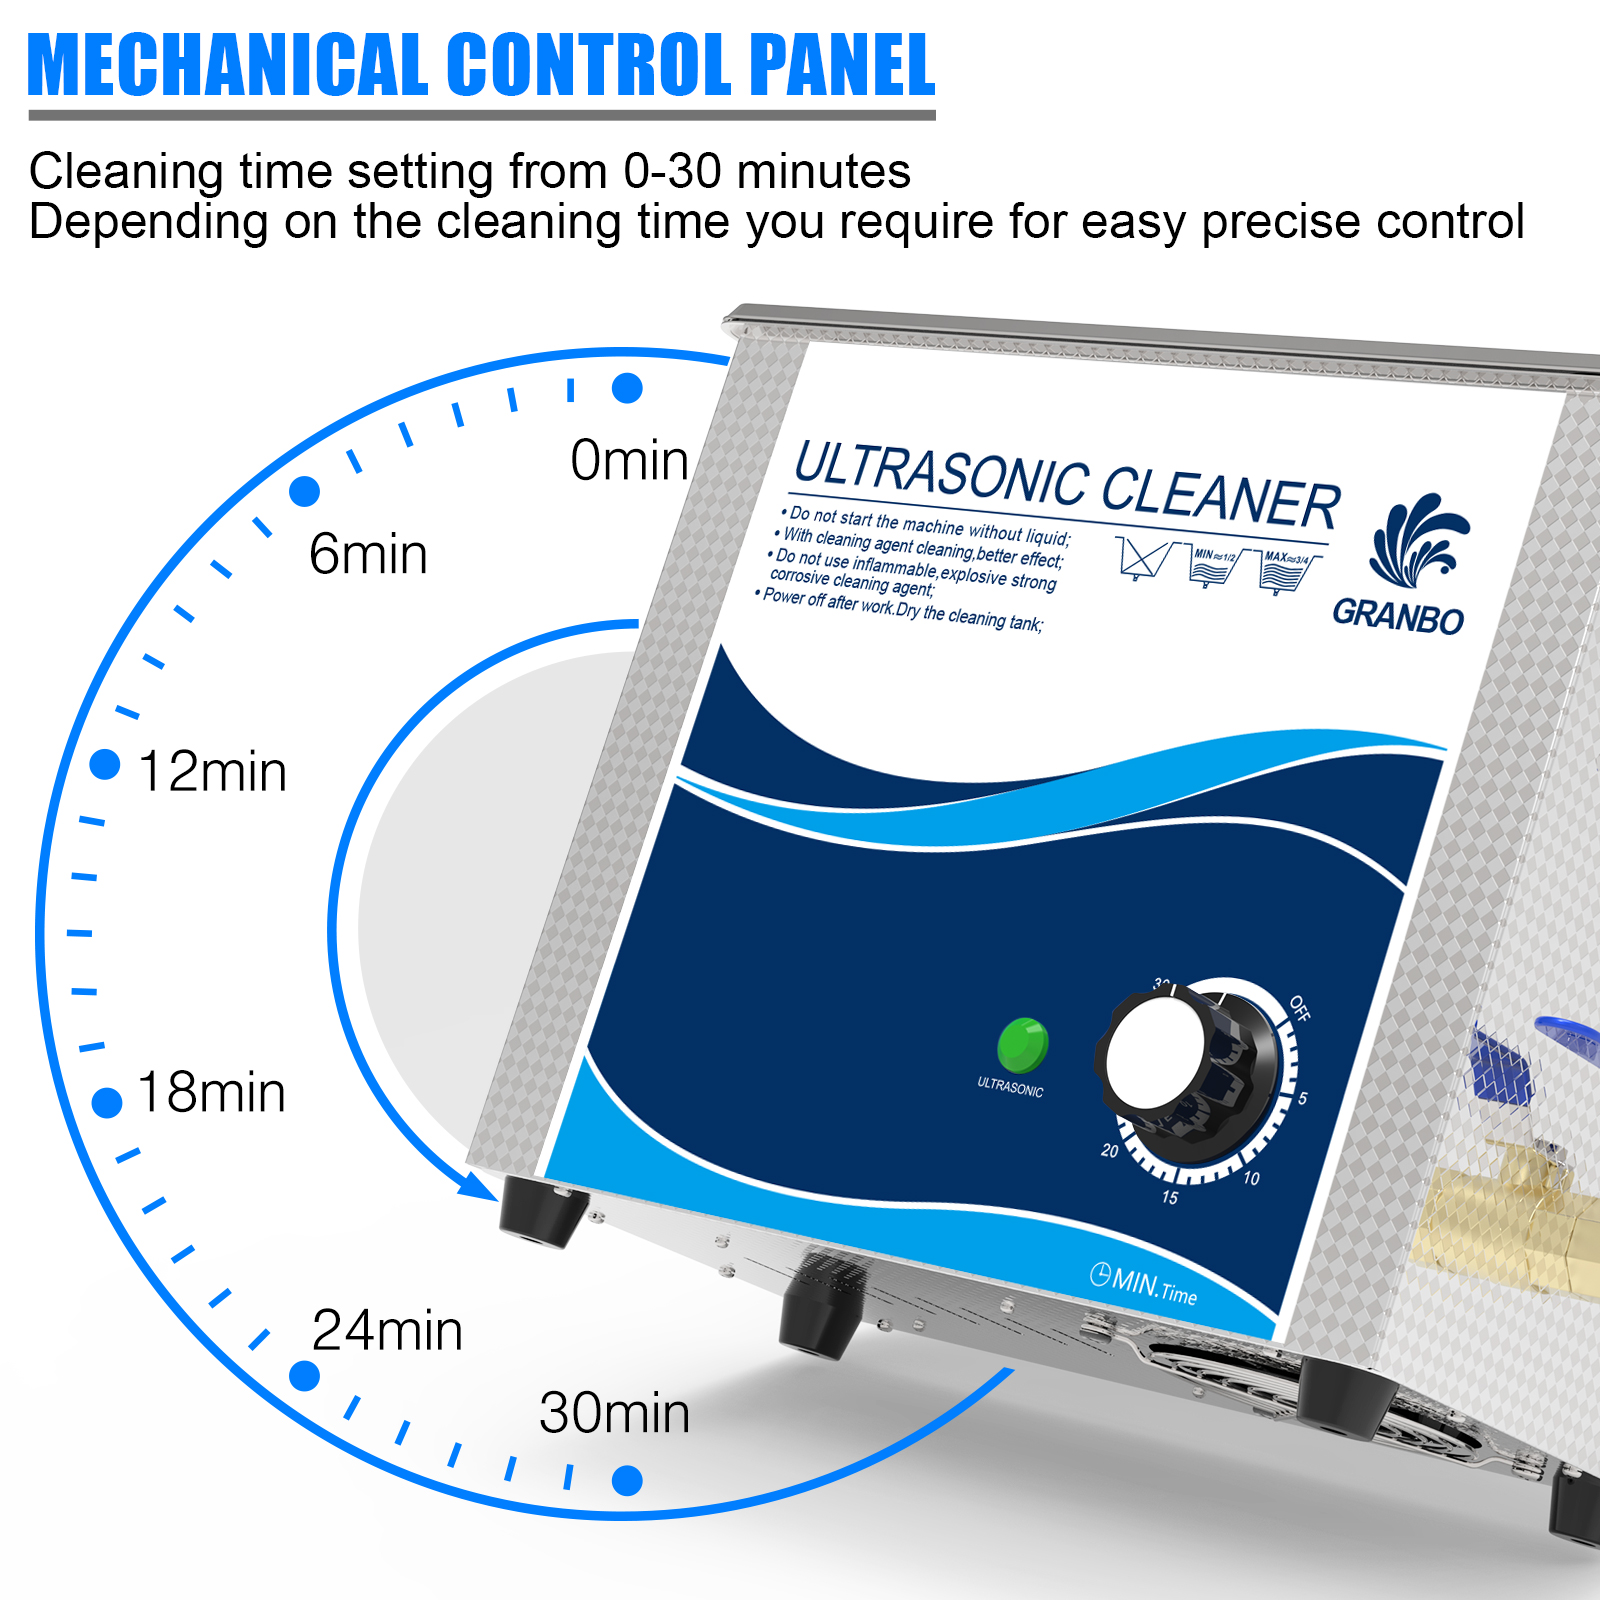 Efficient cleaning of various PCB circuit boards - Ultrasonic cleaner with alcohol cleaning solution